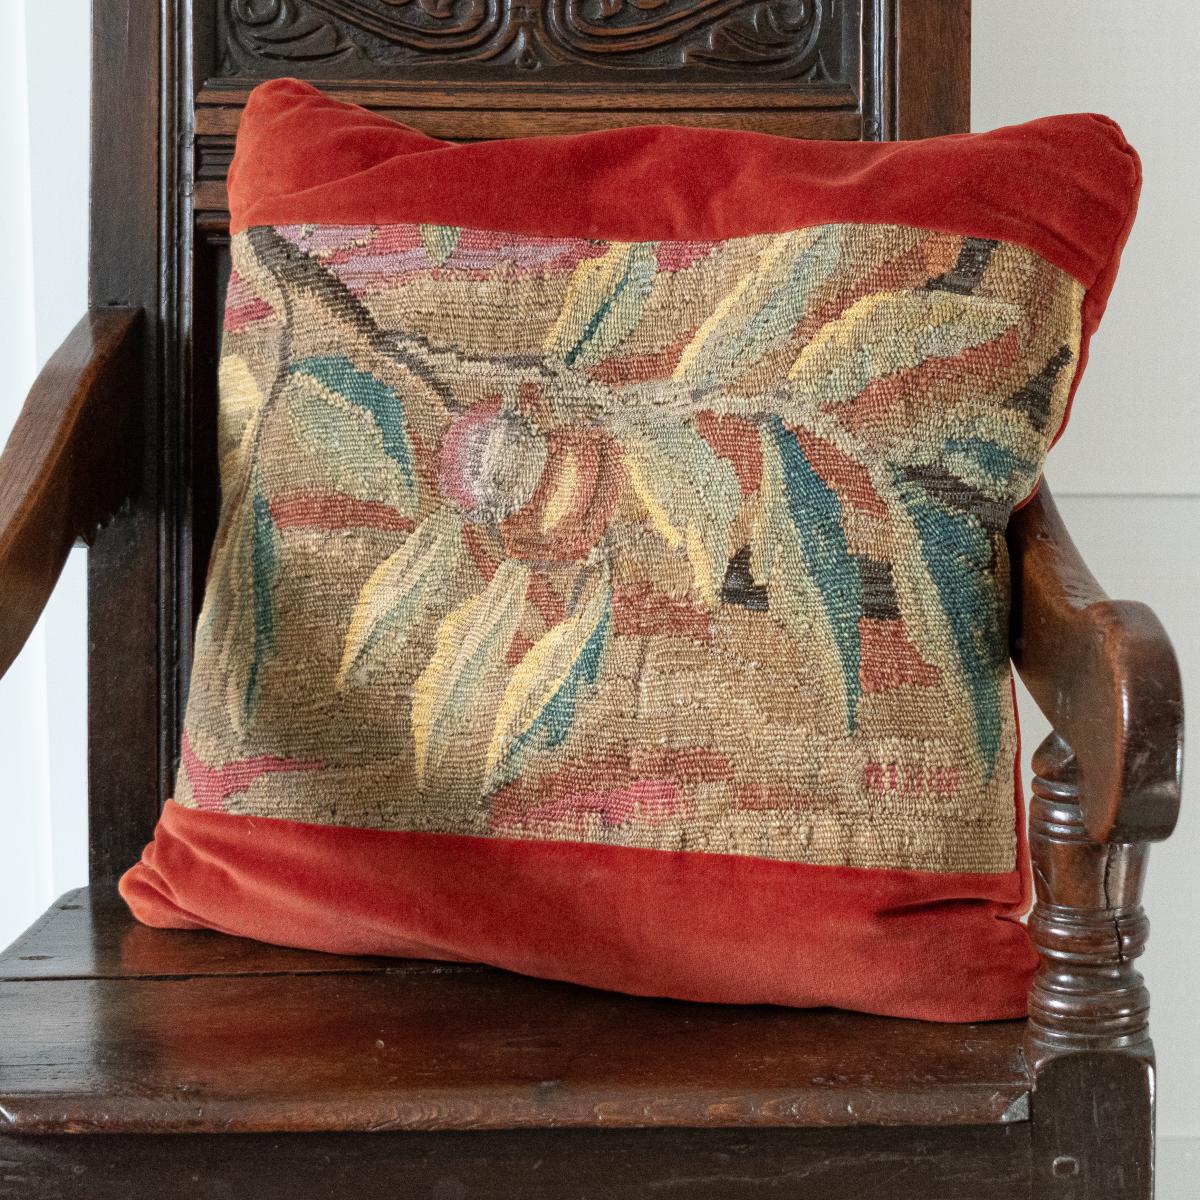 A large cushion of 17th century tapestry and velvet